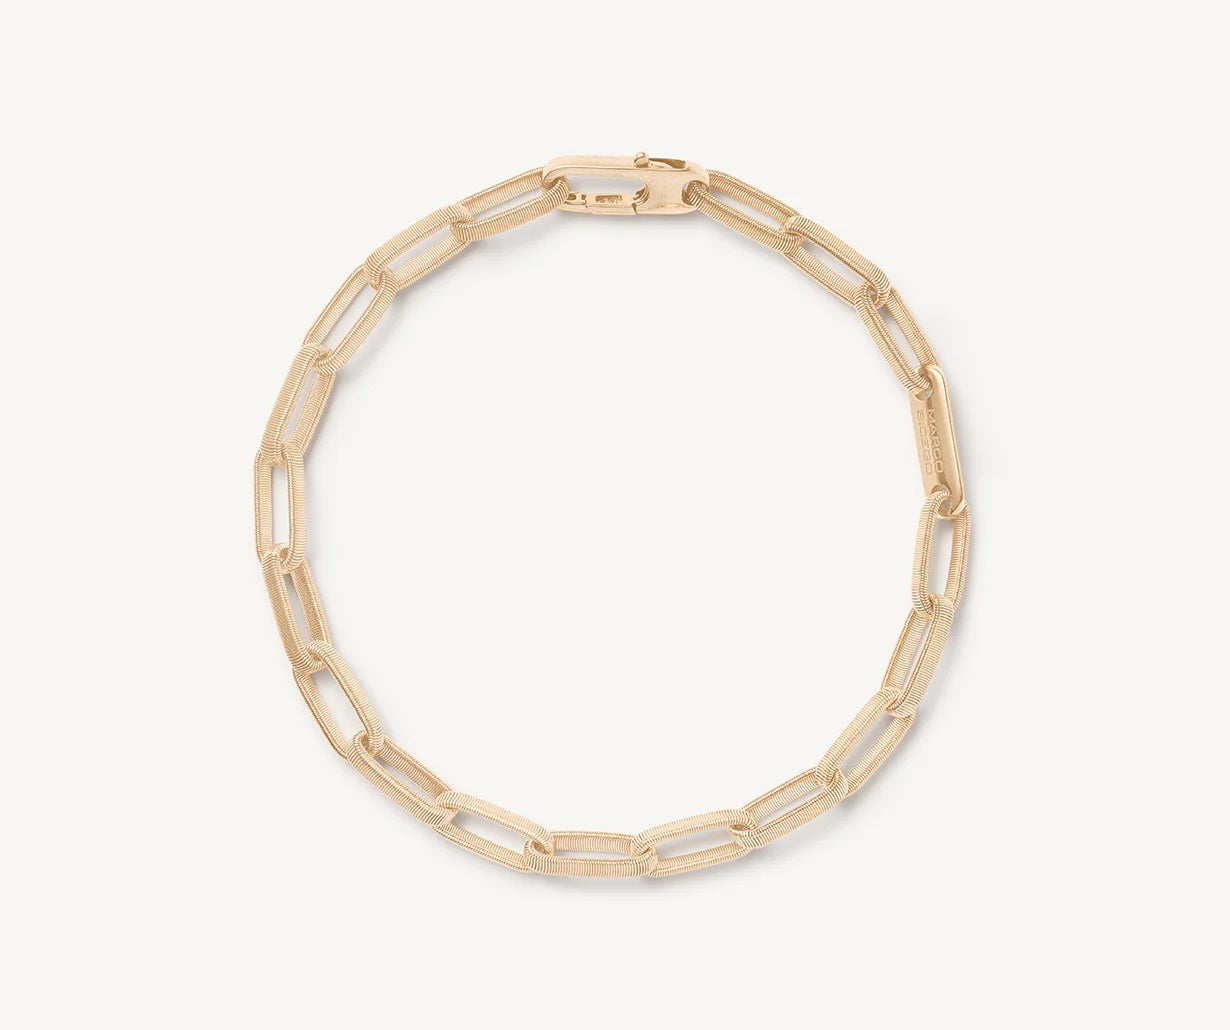 18K YELLOW GOLD WIRE WRAPPED LINK BRACELET FROM THE UOMO COLLECTION